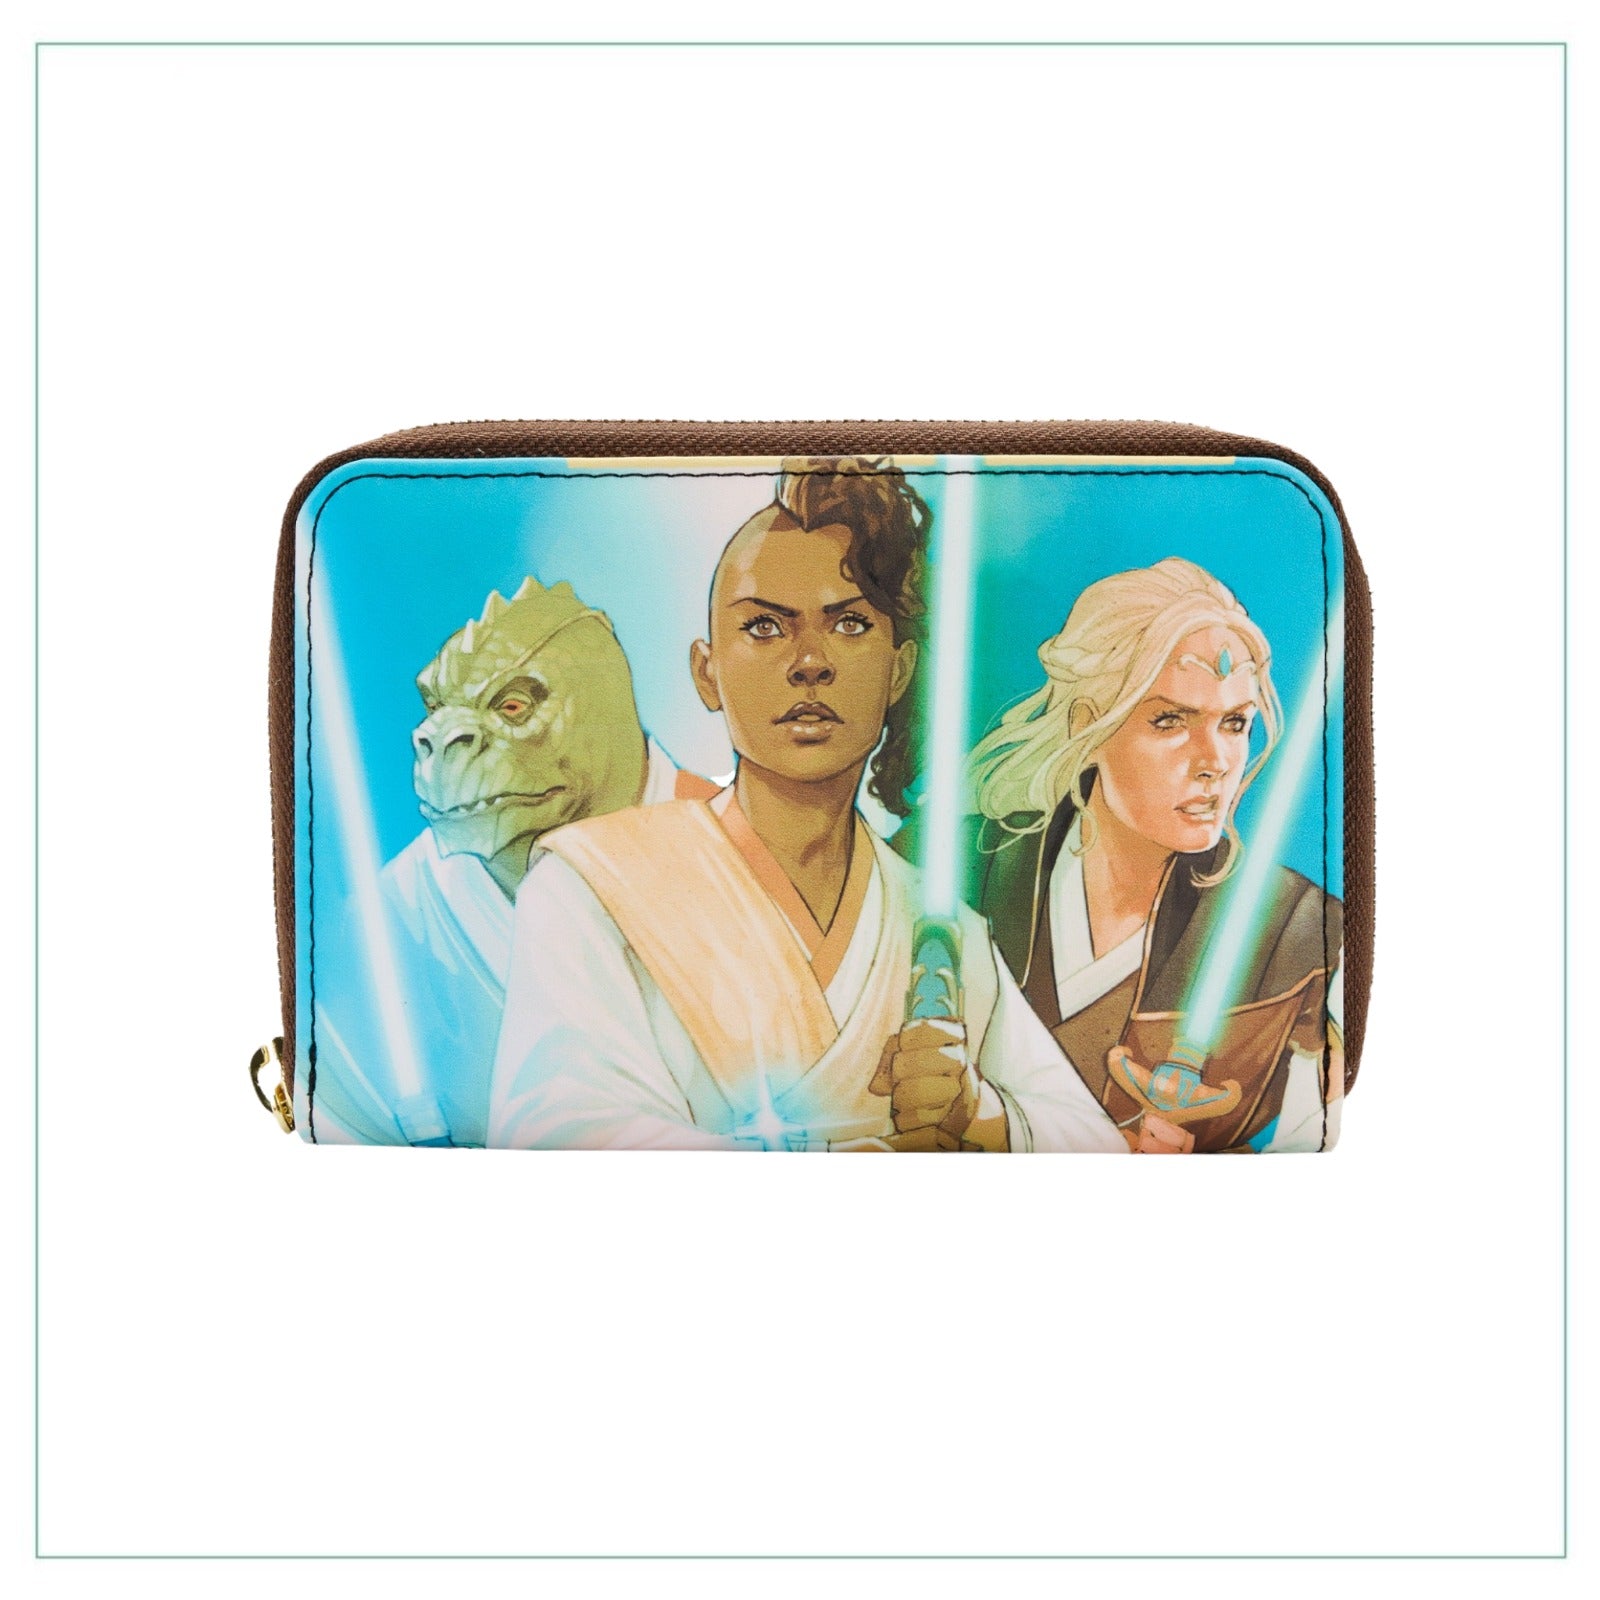 Loungefly Star Wars The High Republic Comic Cover Zip Around Wallet